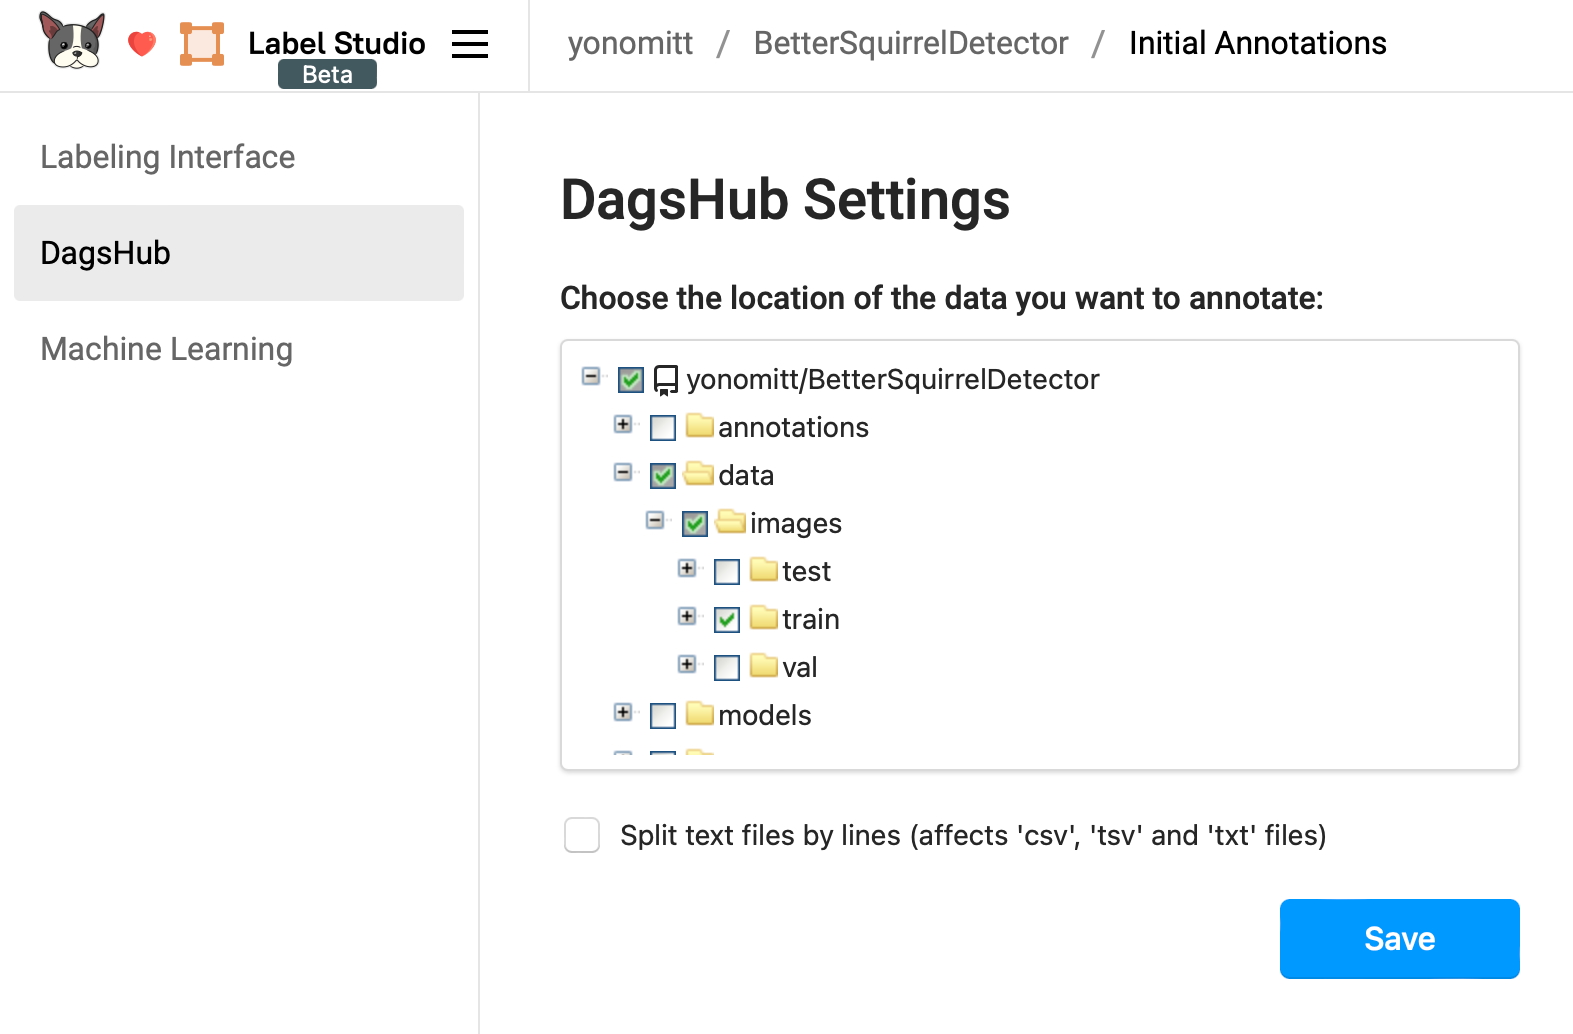 Screenshot of the DagsHub settings for Label Studio with the training folder selected